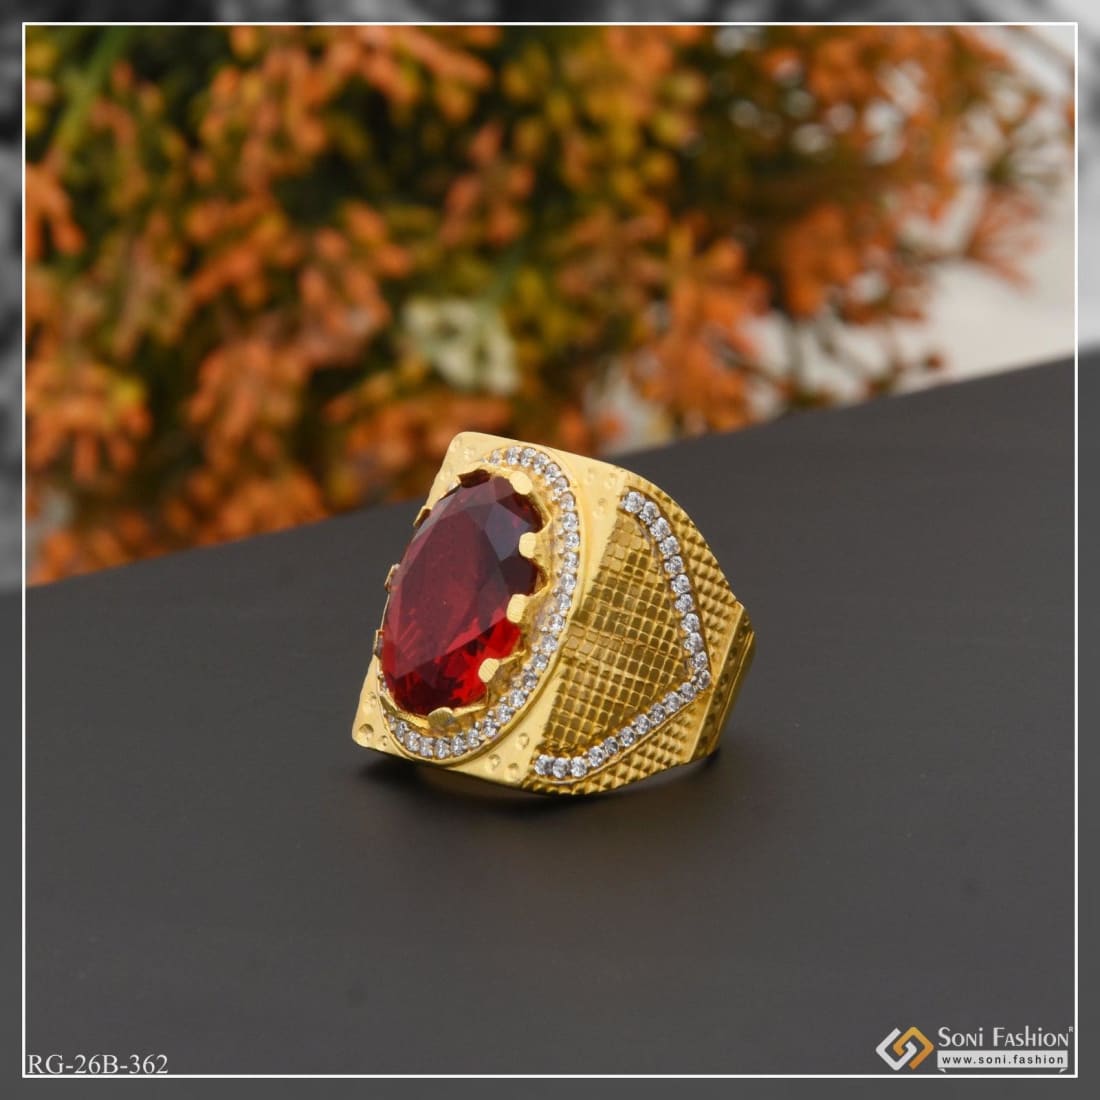 1 Gram Gold Forming Red Stone With Diamond Antique Design Ring For Men -  Style A936 at Rs 2780.00 | Men Gold Ring | ID: 2850966521212